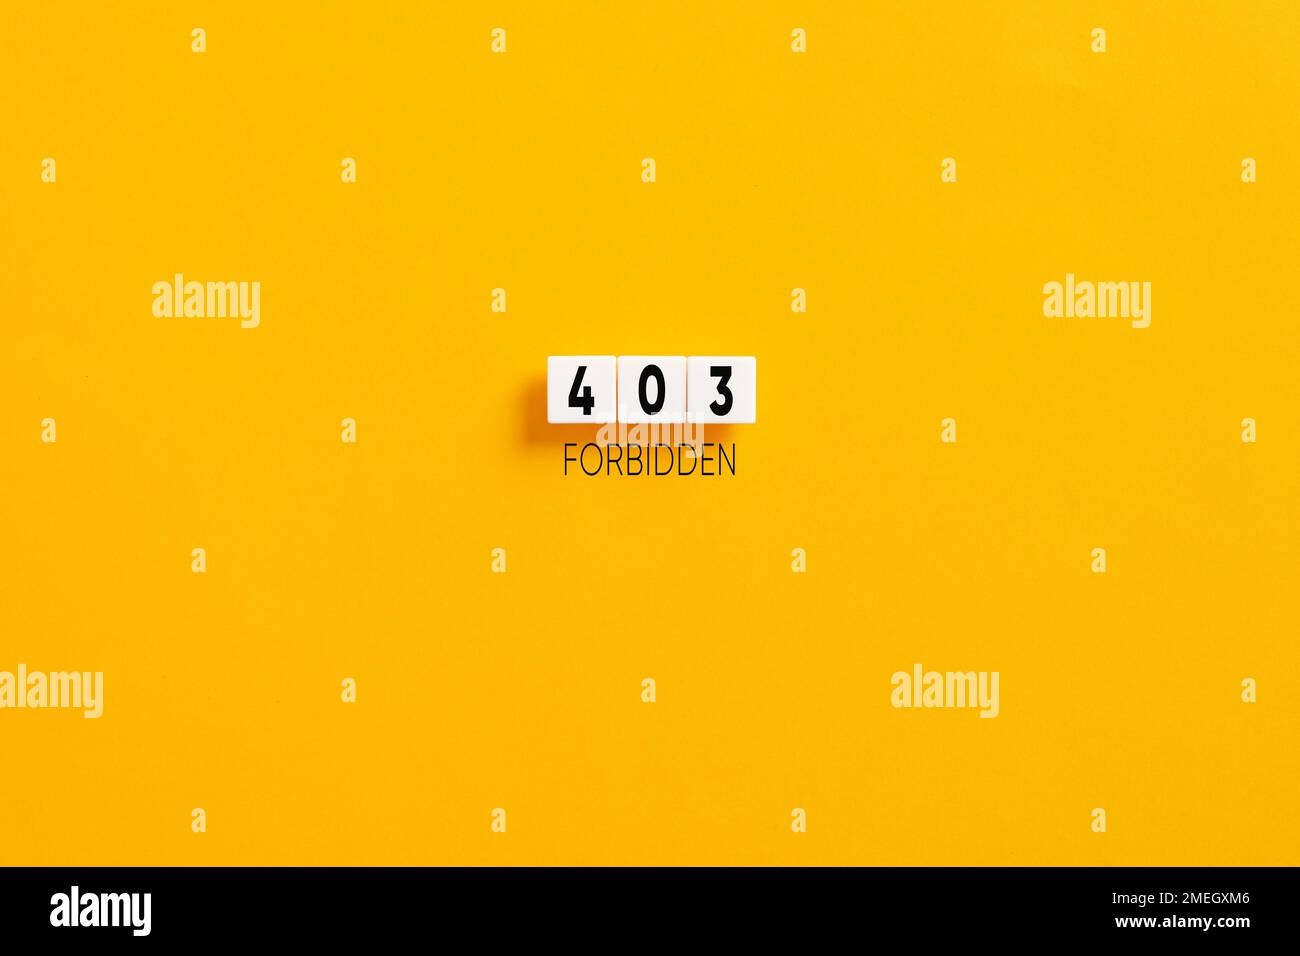 White letter blocks on yellow background with the message 403 forbidden. Http 403 forbidden client error. Stock Photo